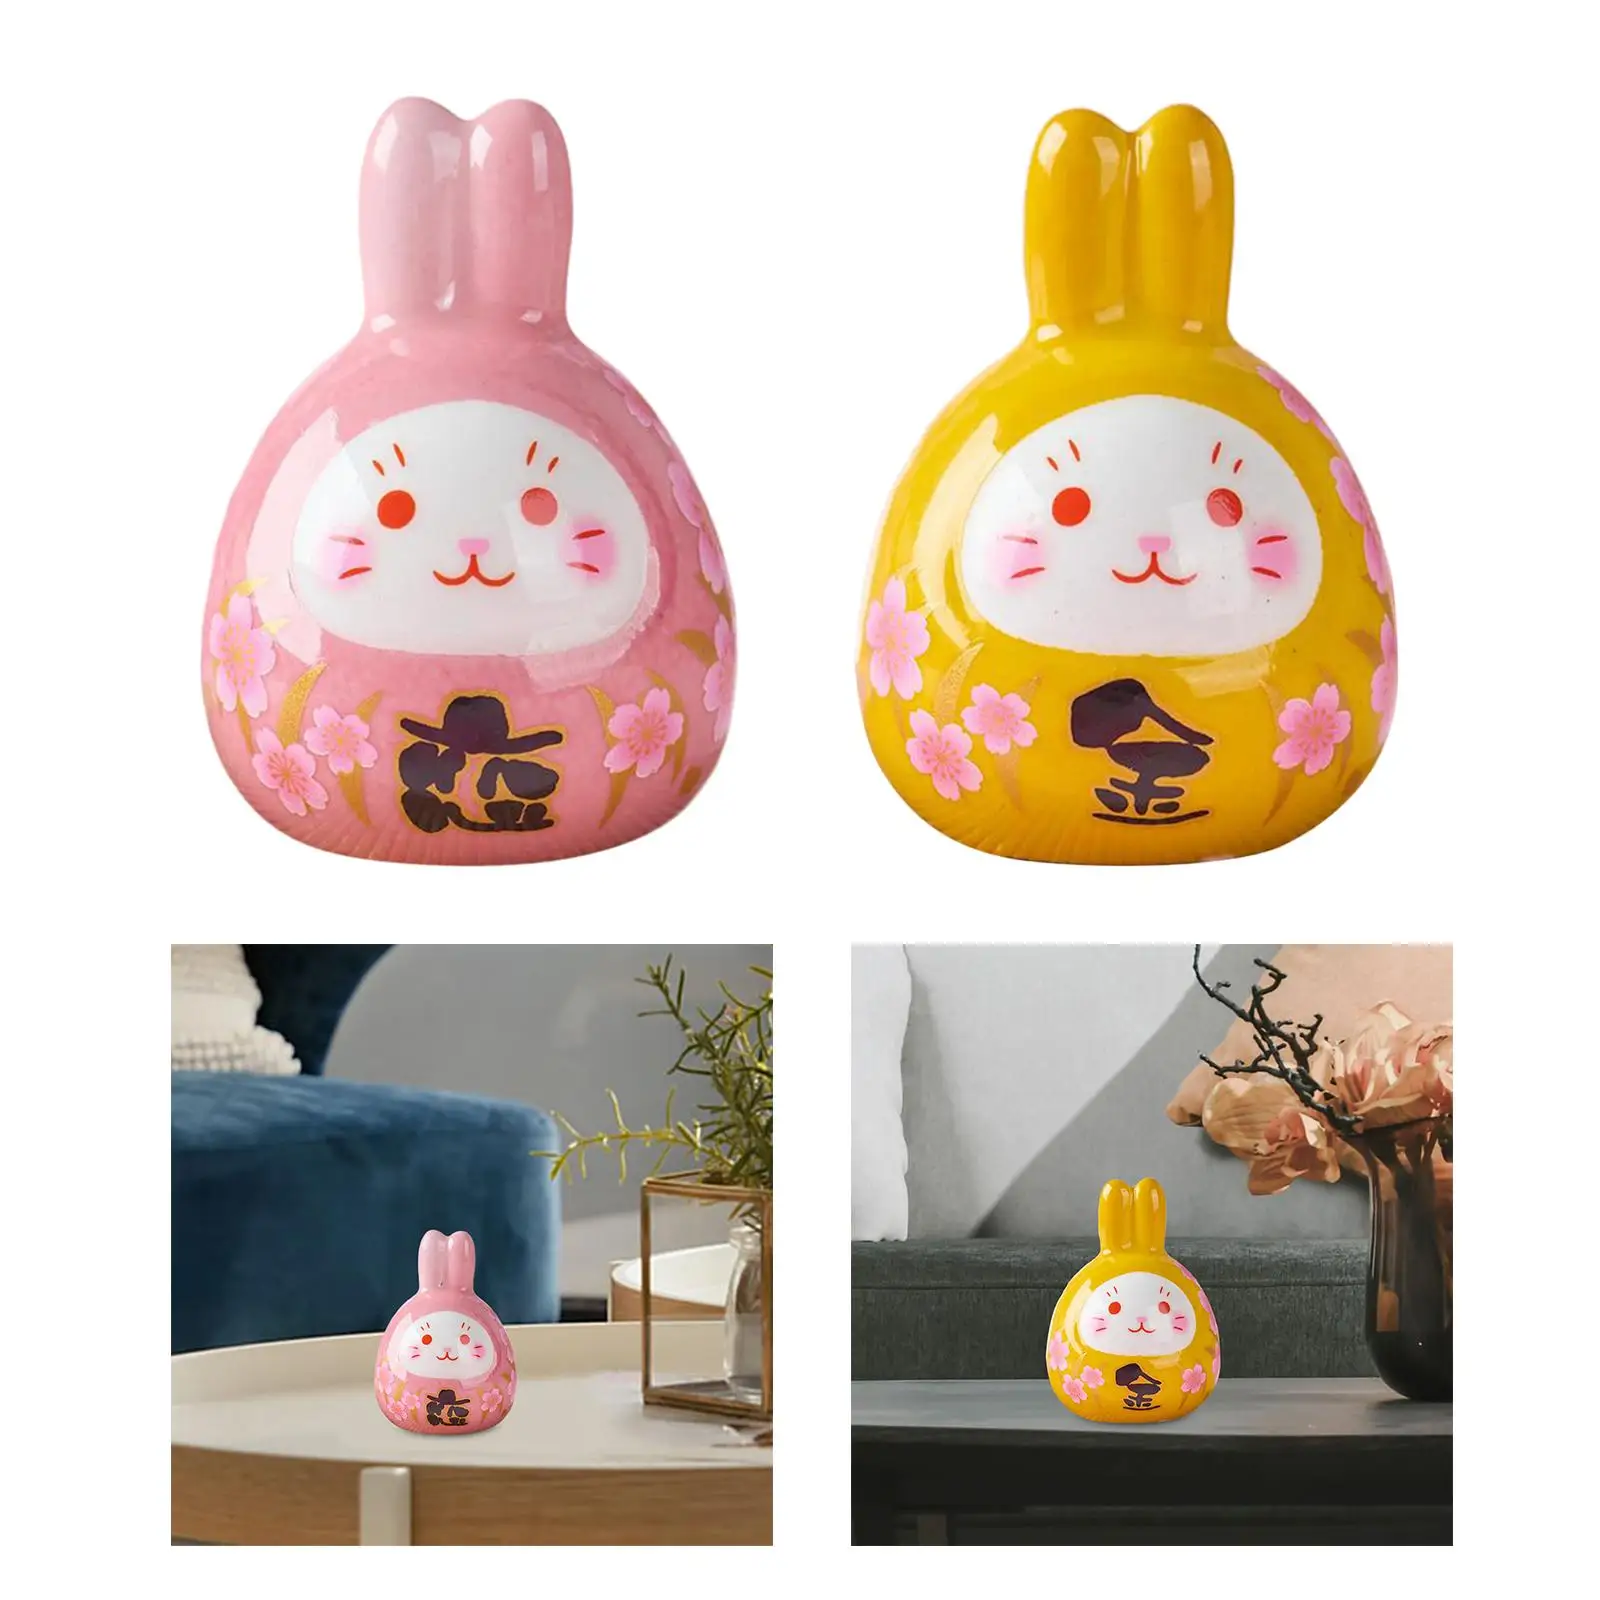 Chinese New Year Miniature Rabbit Figures Rabbit Ornament for Car Dashboard Office Table Desk Chinese New Year Decoration